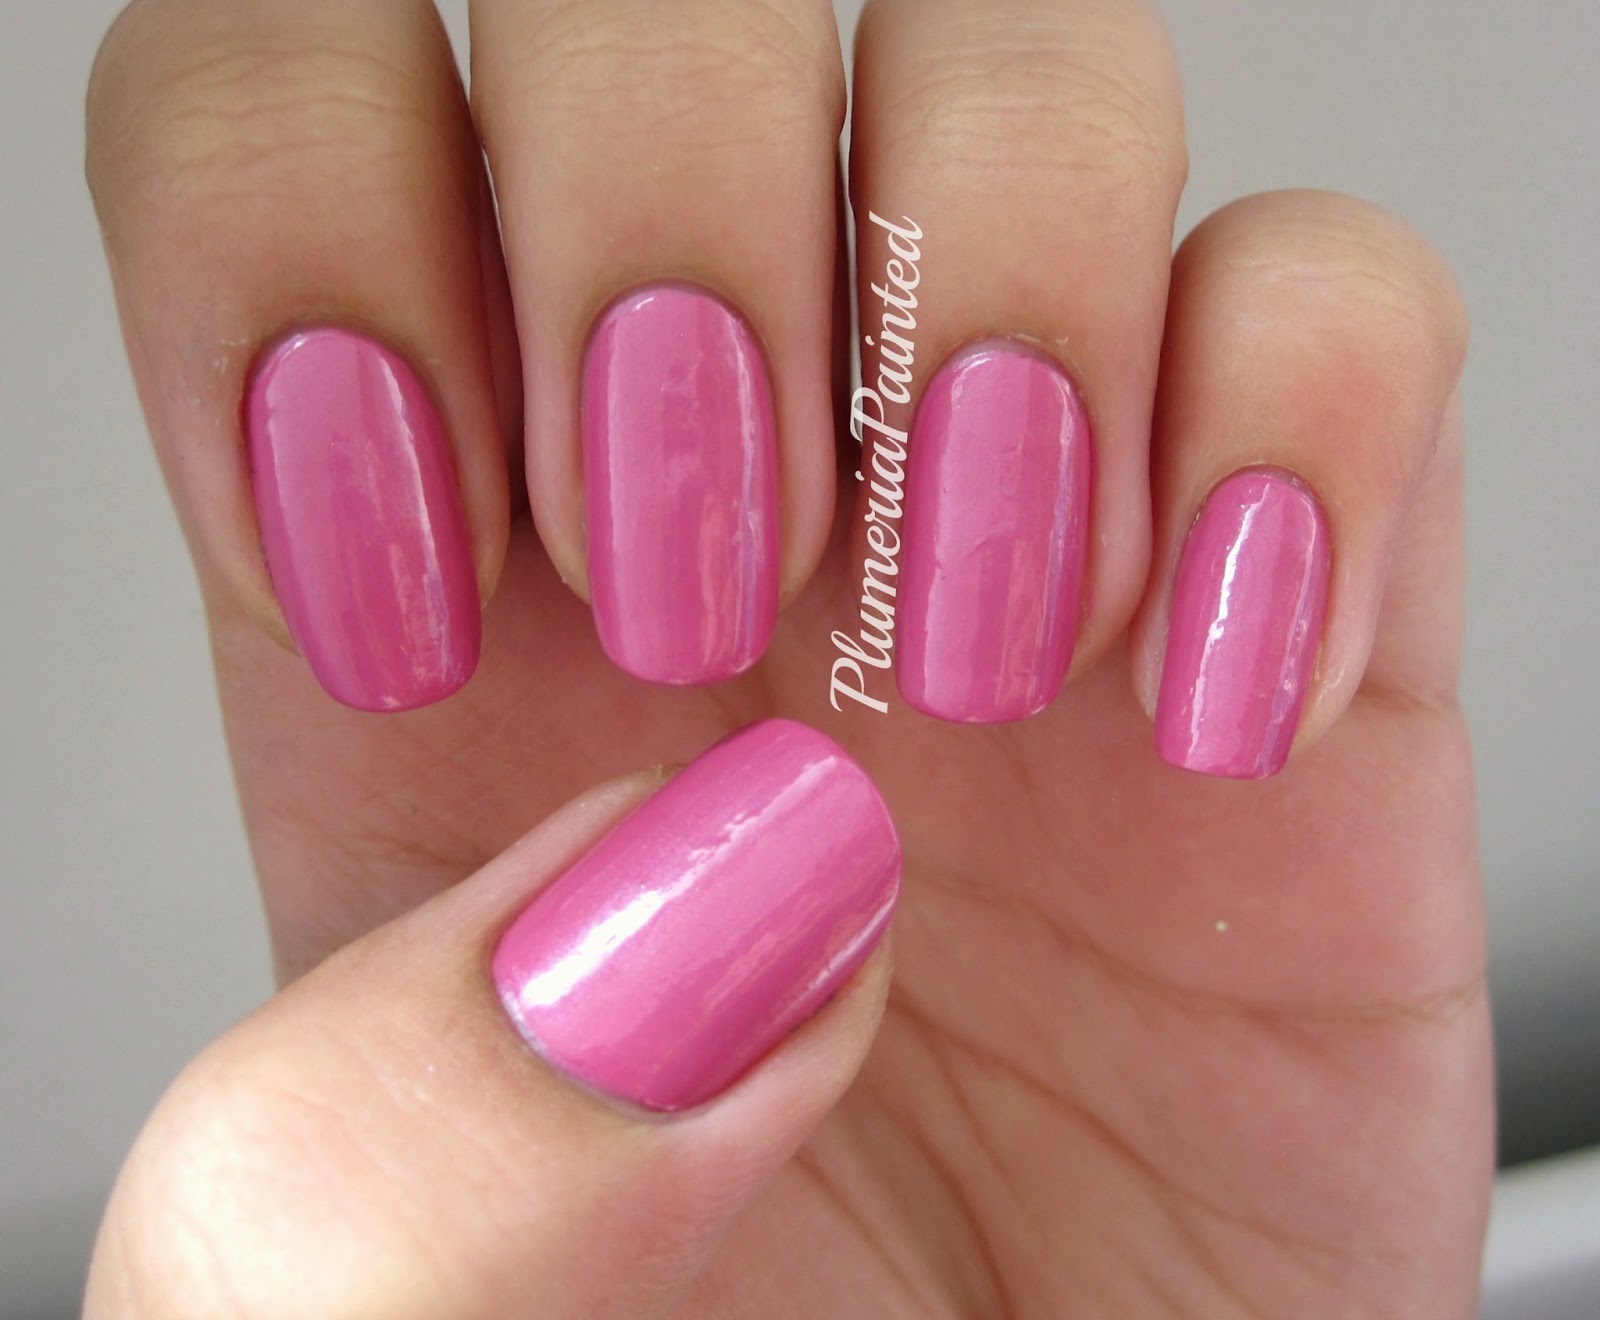 2. OPI Nail Lacquer in "Rose Water" - wide 9